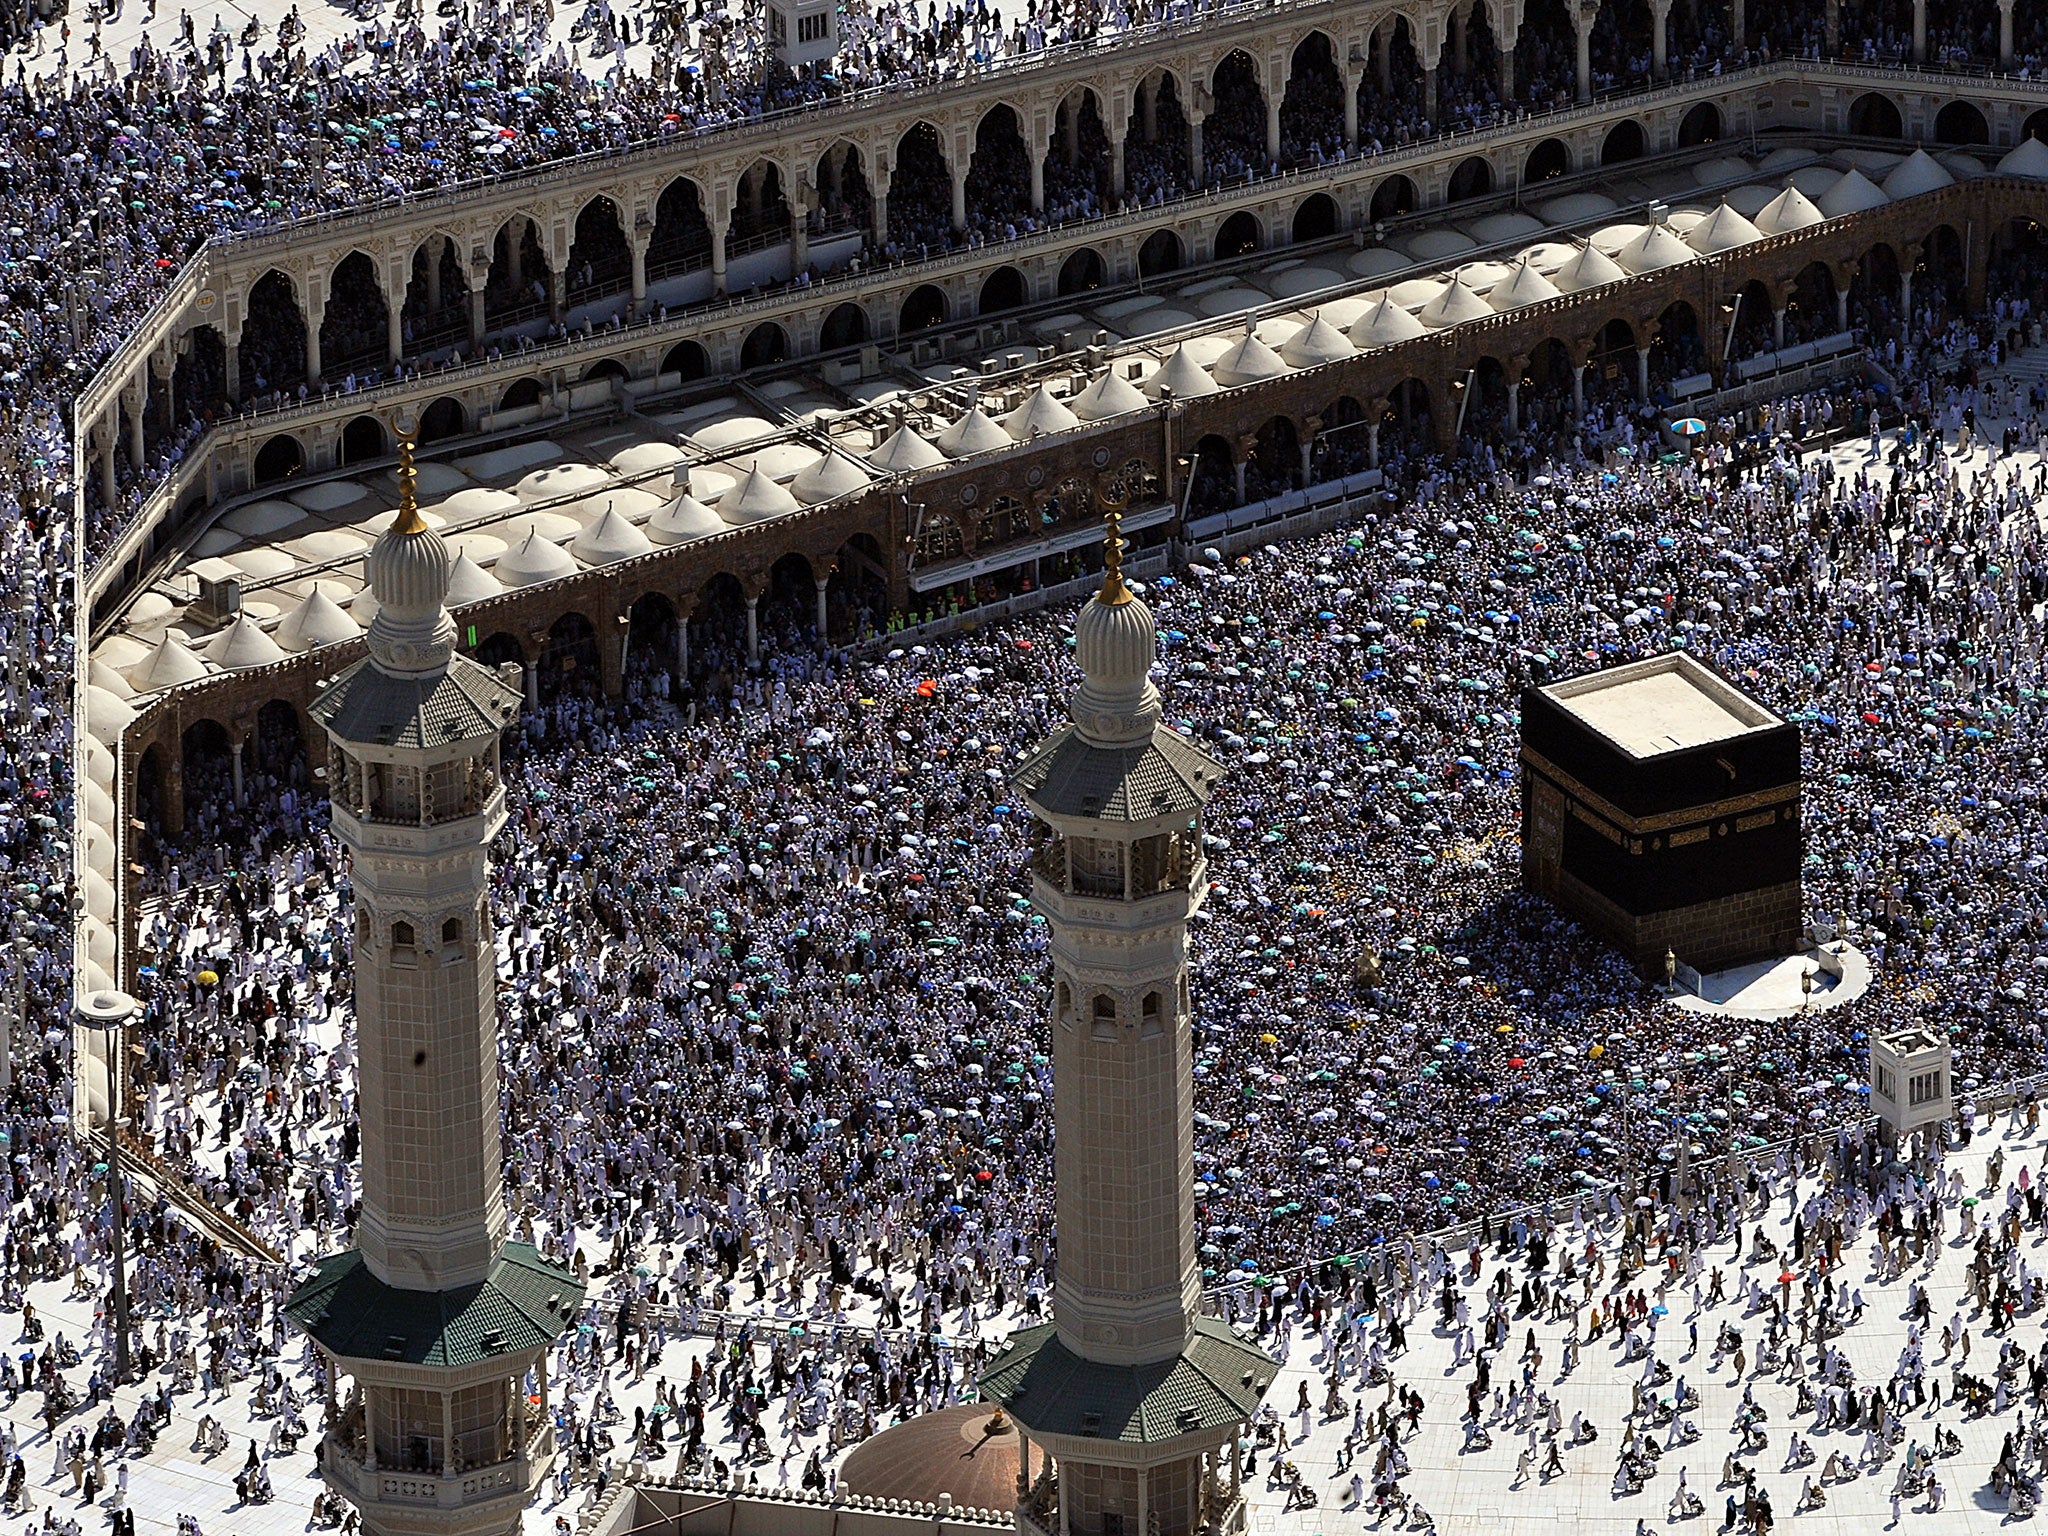 An aerial view shows the Kaaba at the Grand mosque in the holy city of Mecca